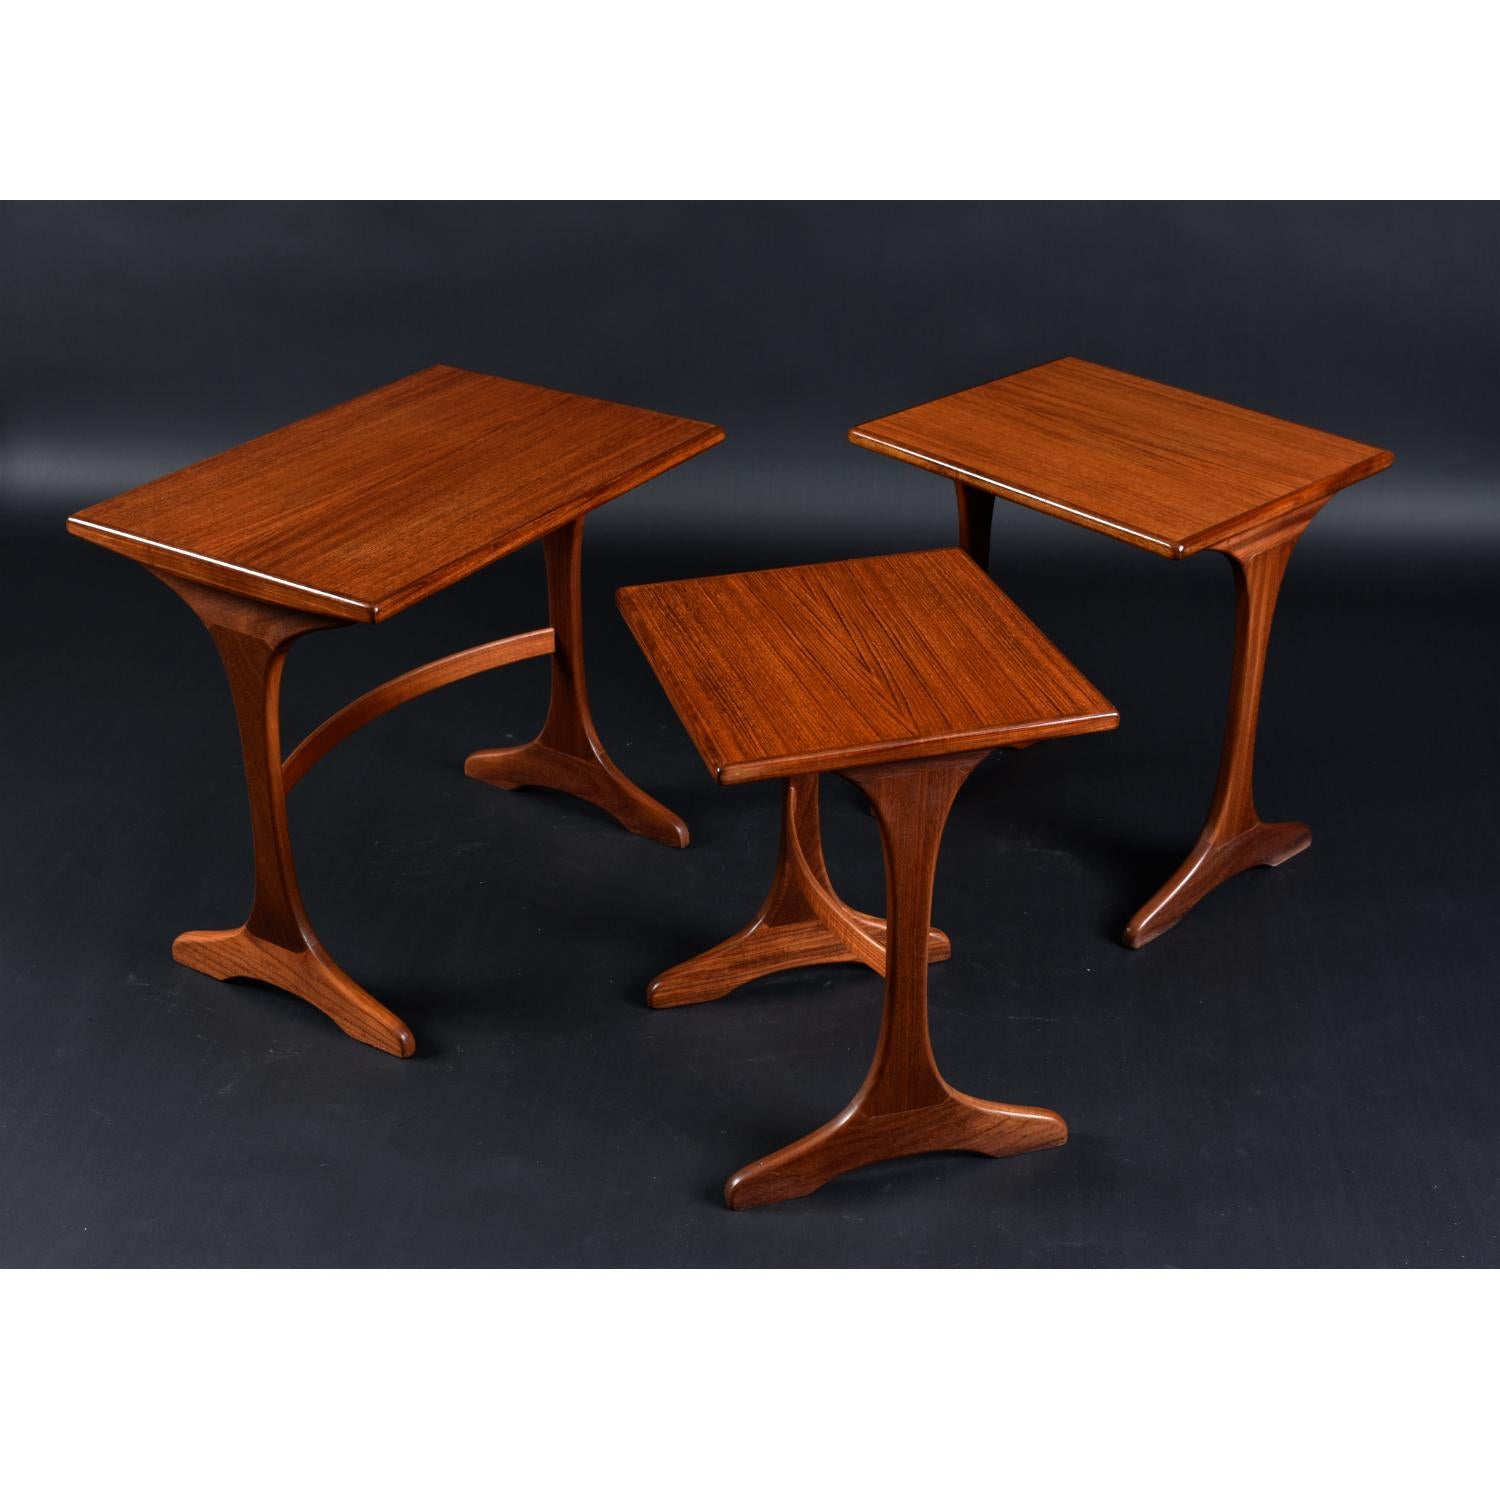 Set of three refinished Mid-Century Modern teak nesting tables by G Plan. Made in England. We love these tables for their unique design. The set of three graduates in size, allowing the smaller tables to easily stow beneath the large table. Over